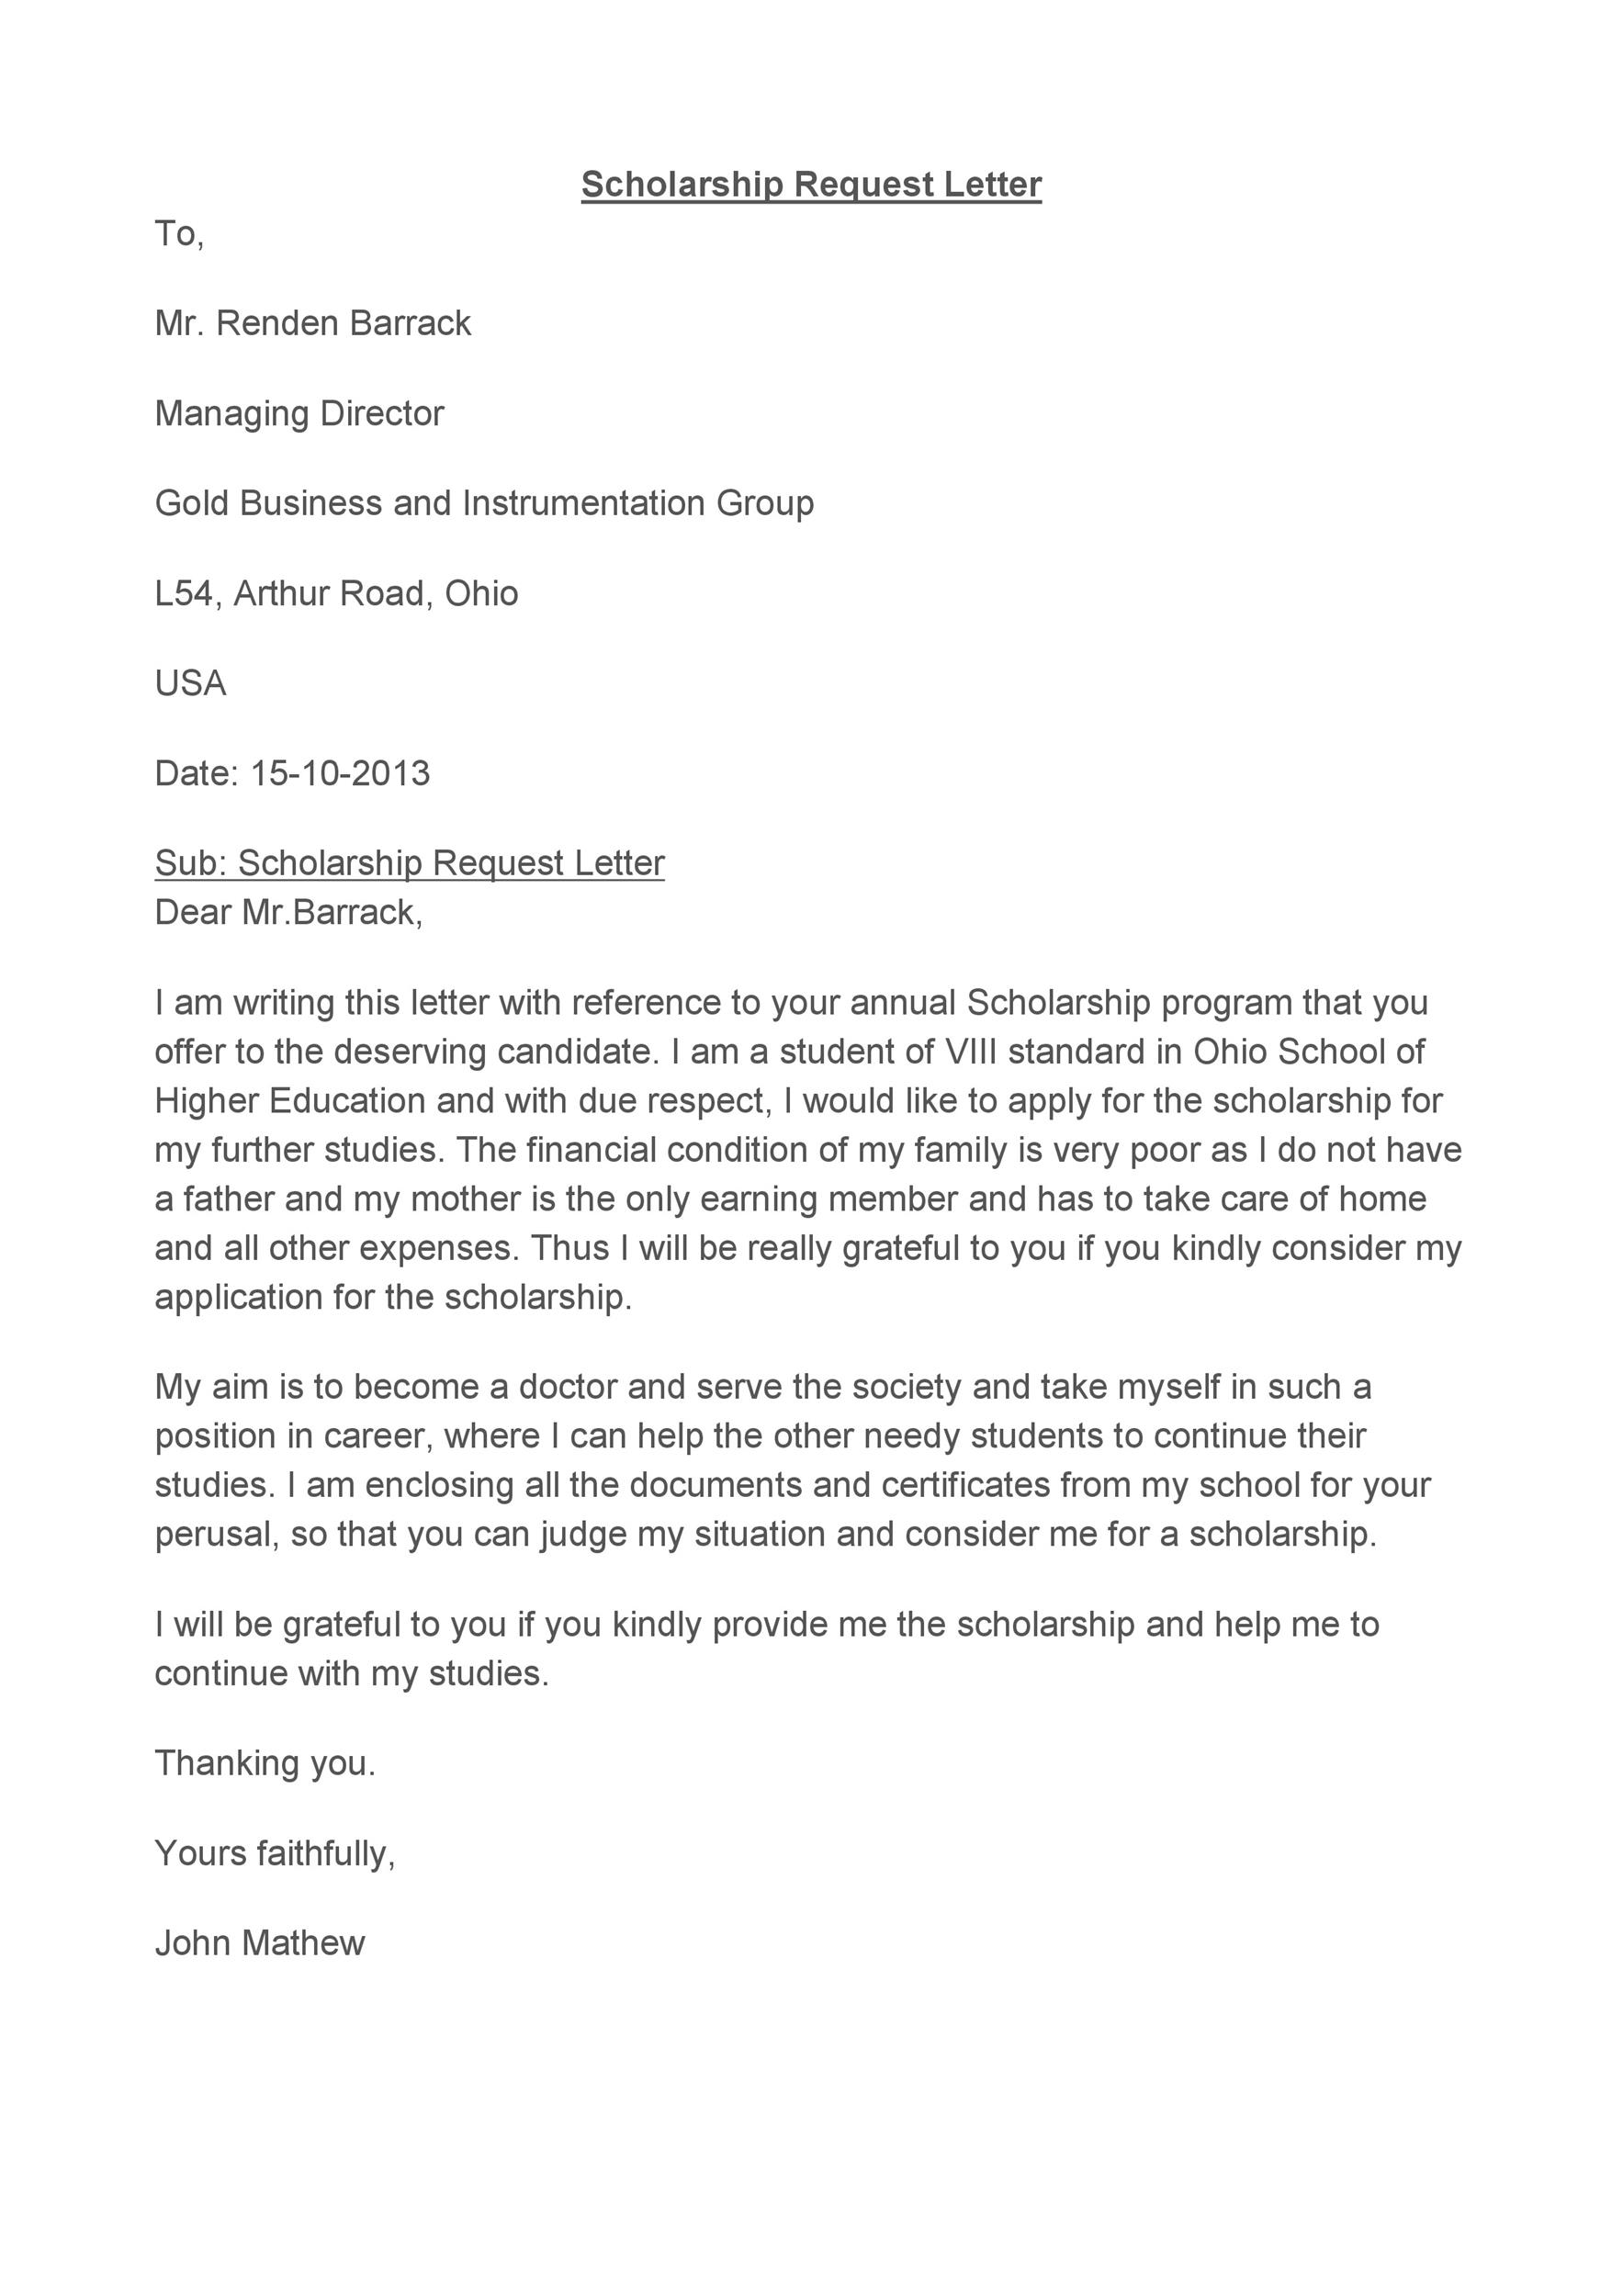 how to write scholarship application letter pdf